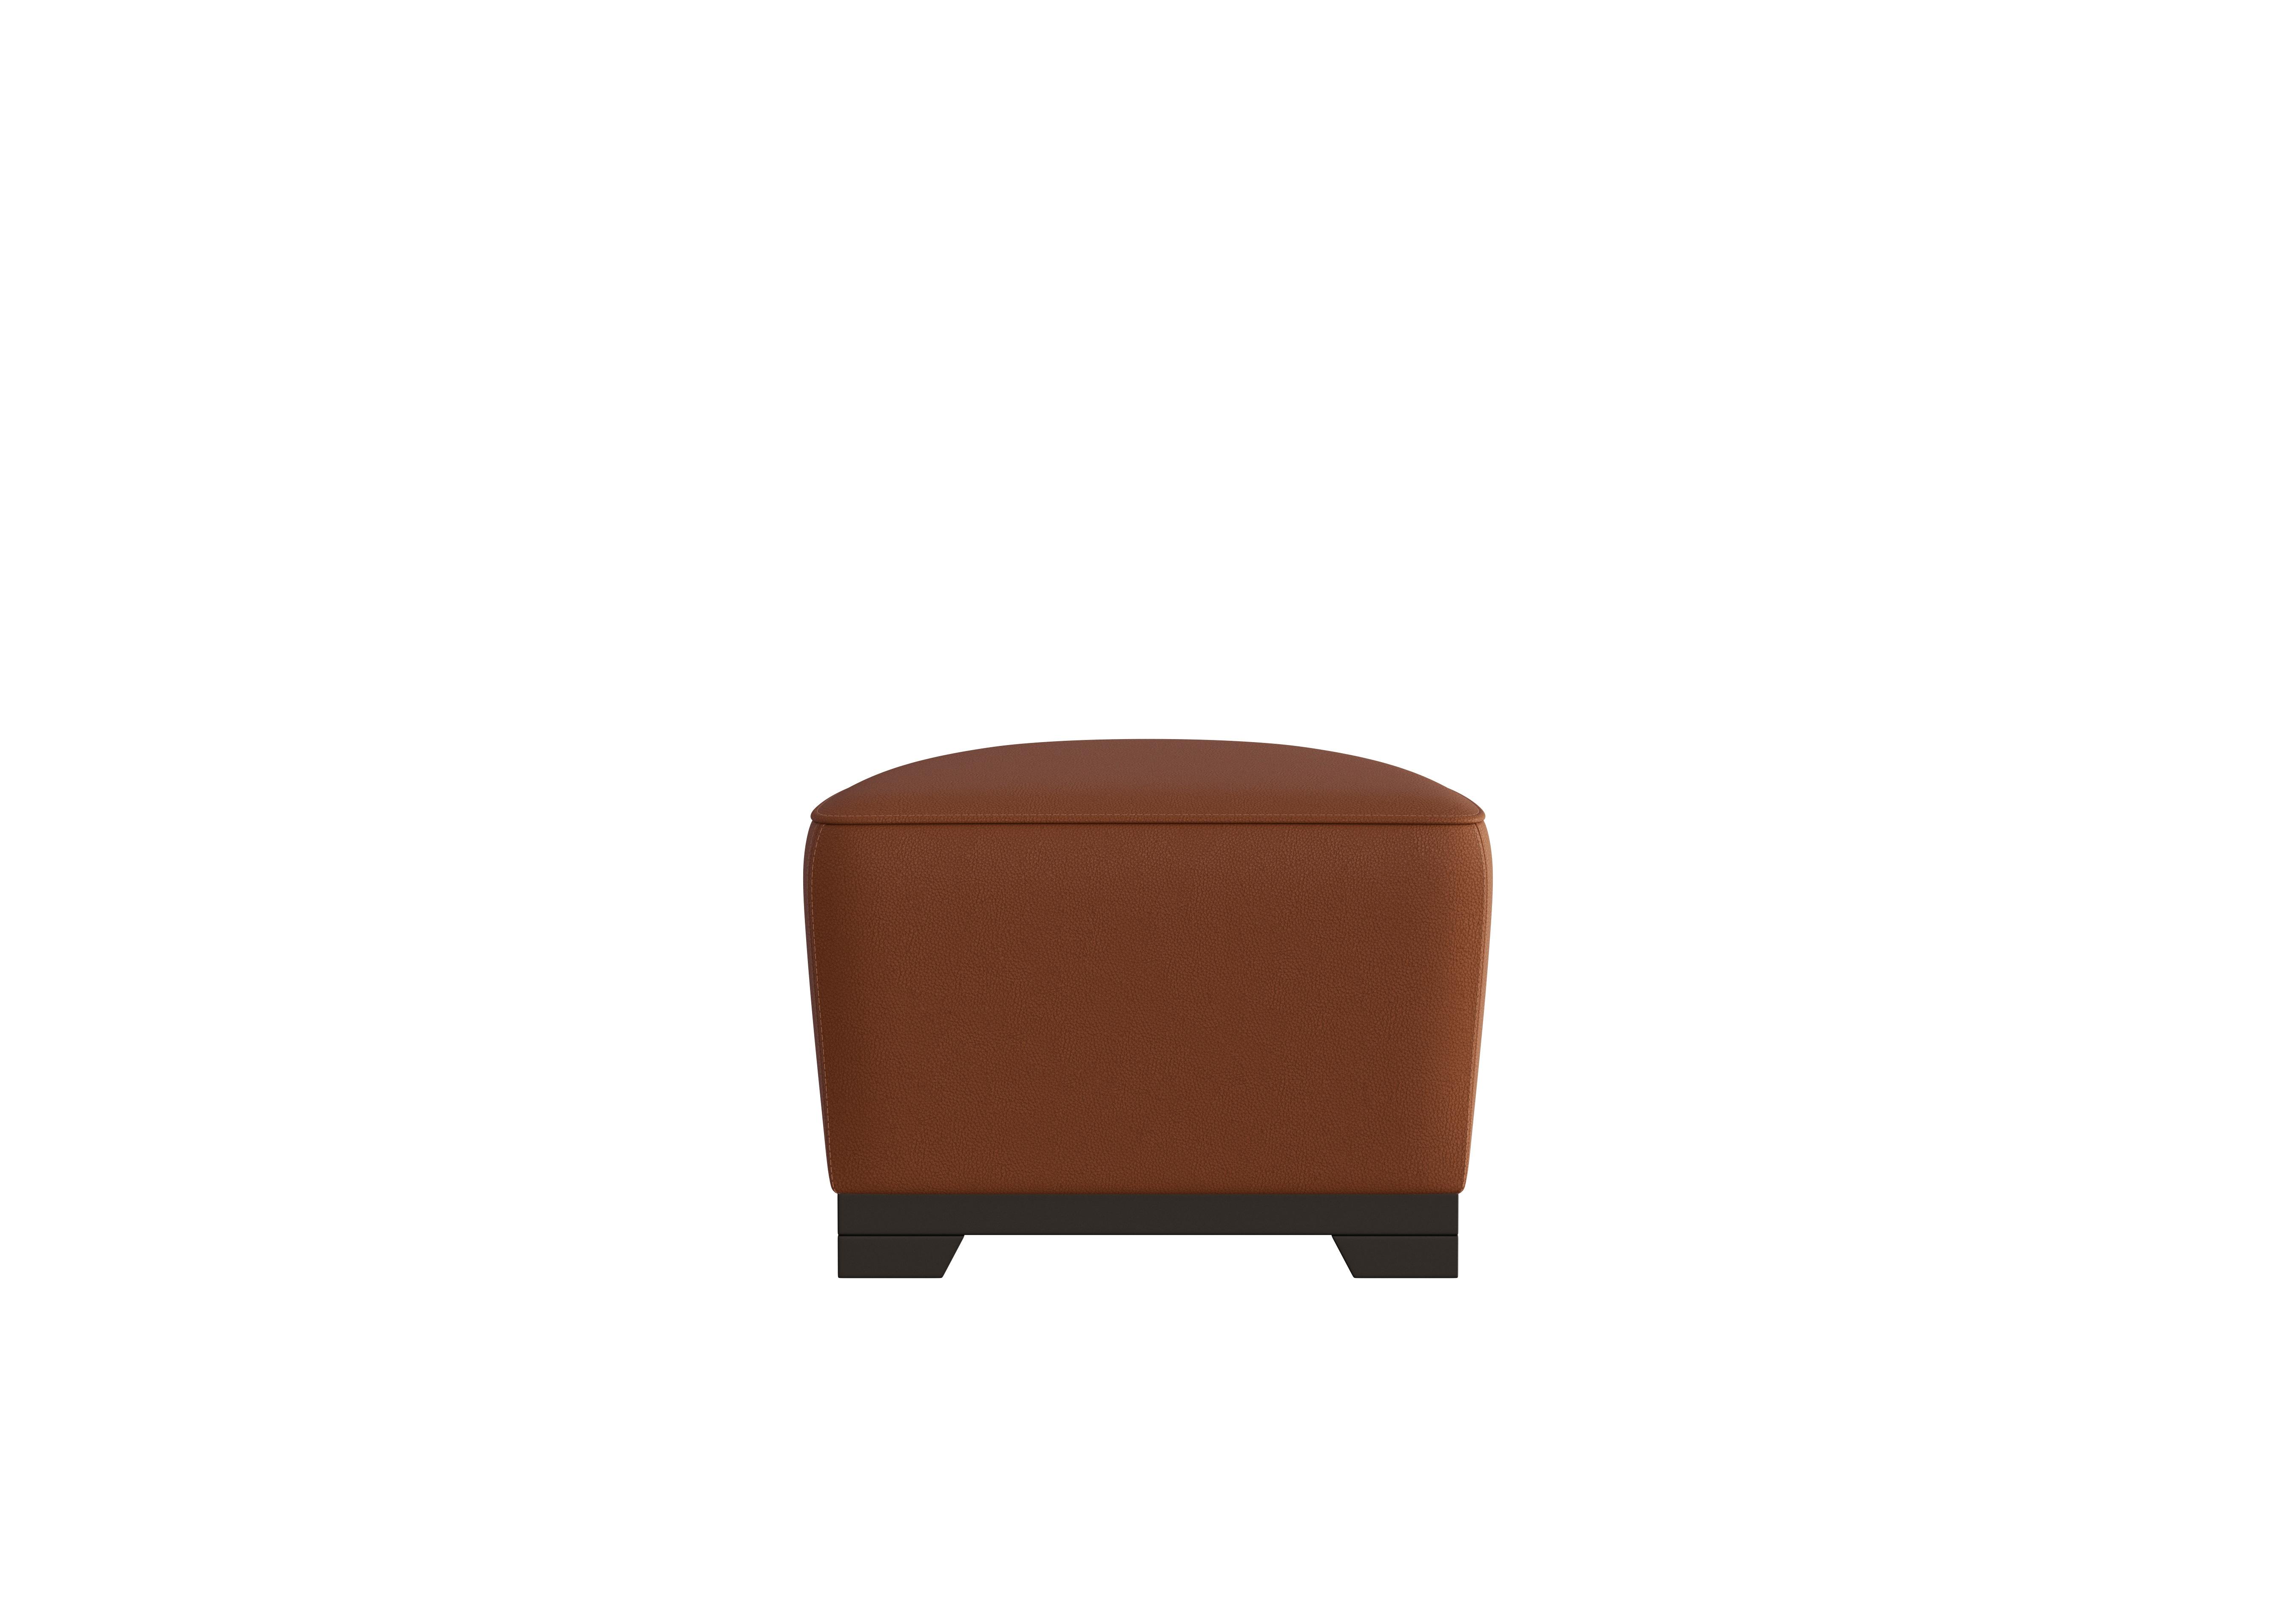 Ketty Leather D-Shaped Footstool in Botero Cuoio 2151 on Furniture Village